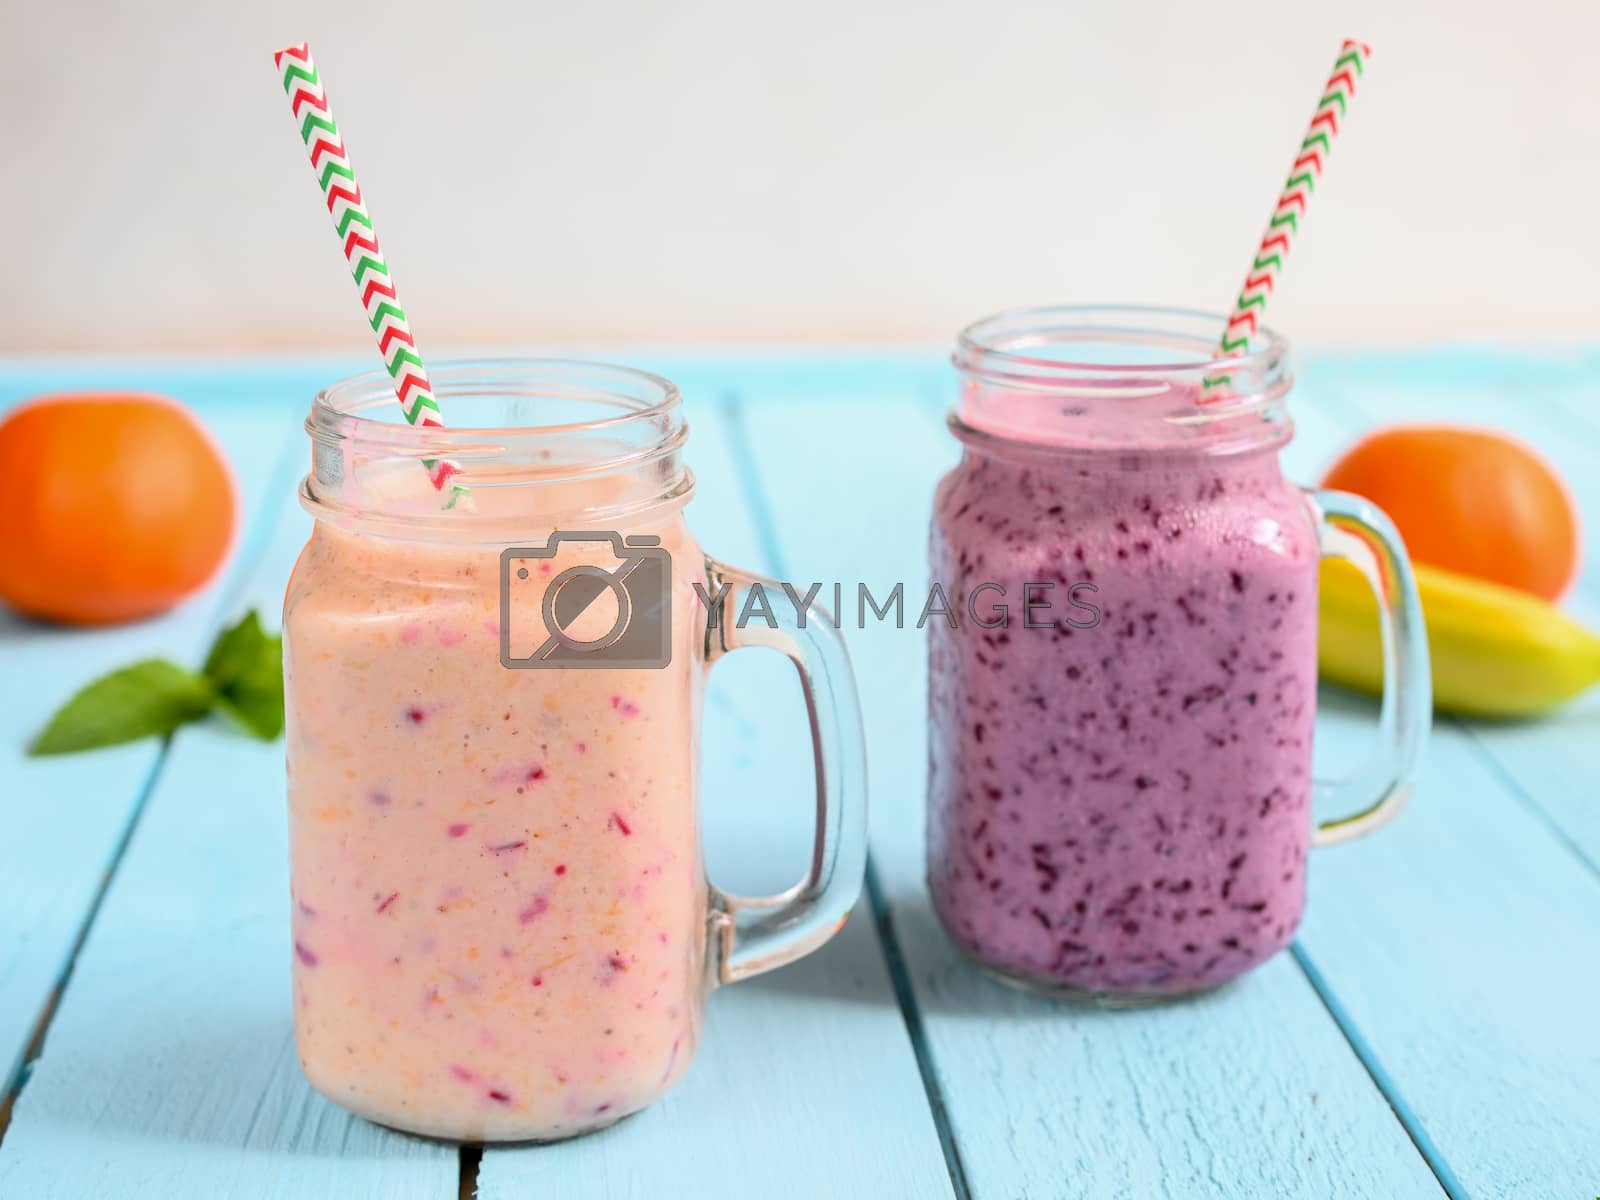 Royalty free image of Blueberry smoothie with mint in mason jar with straw against a wood background by sashokddt